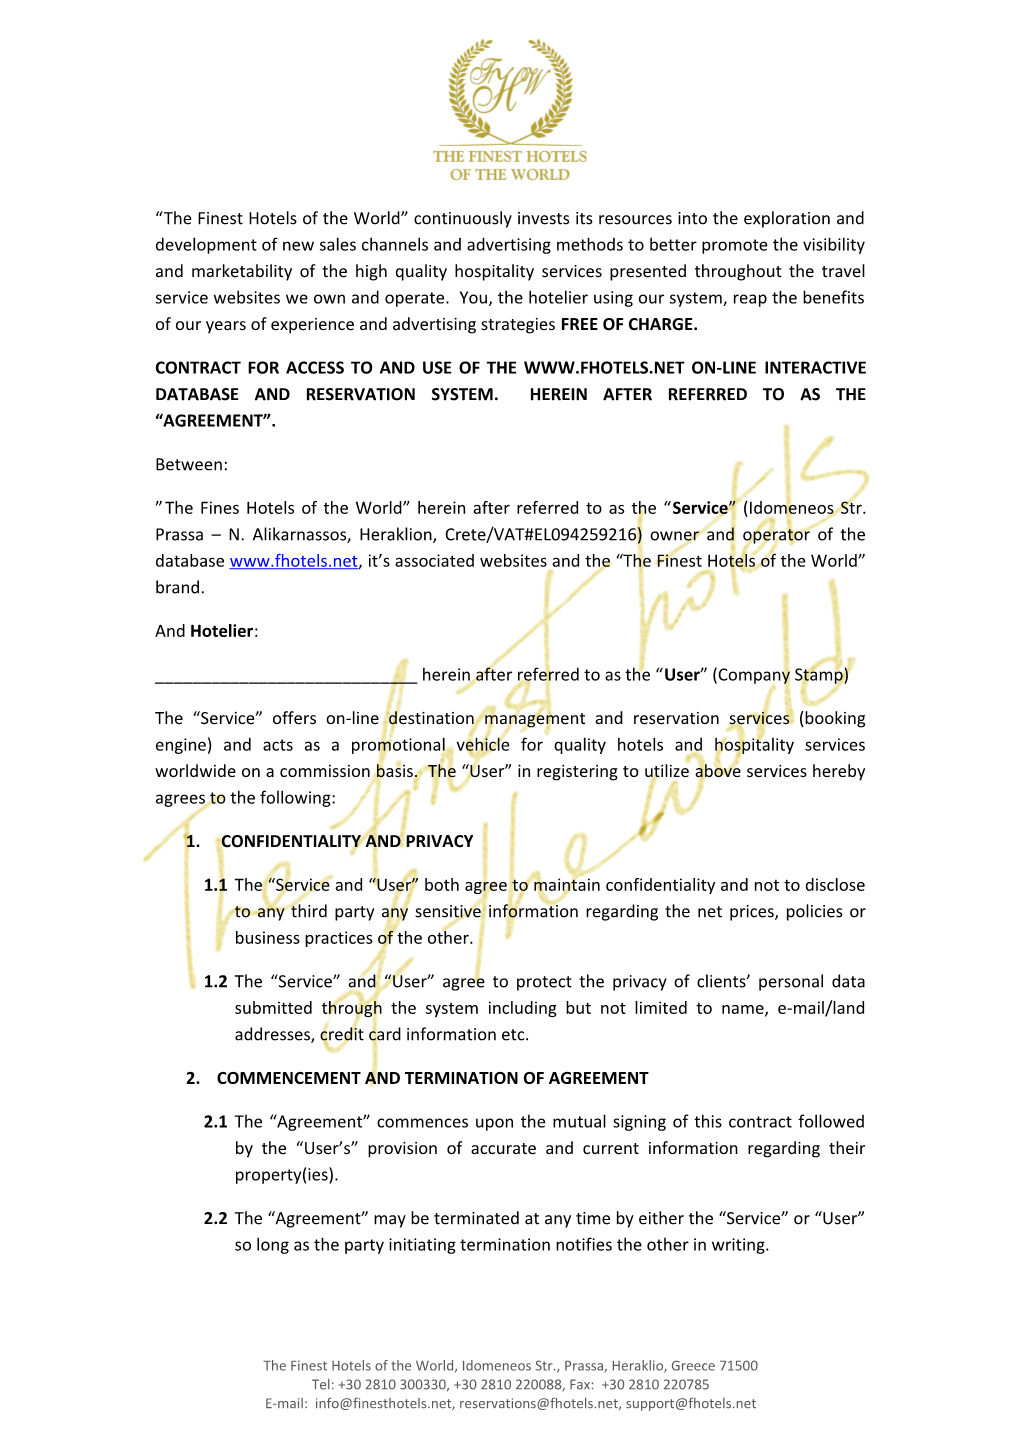 Contract for Access to and Use of the On-Line Interactive Database and Reservation System